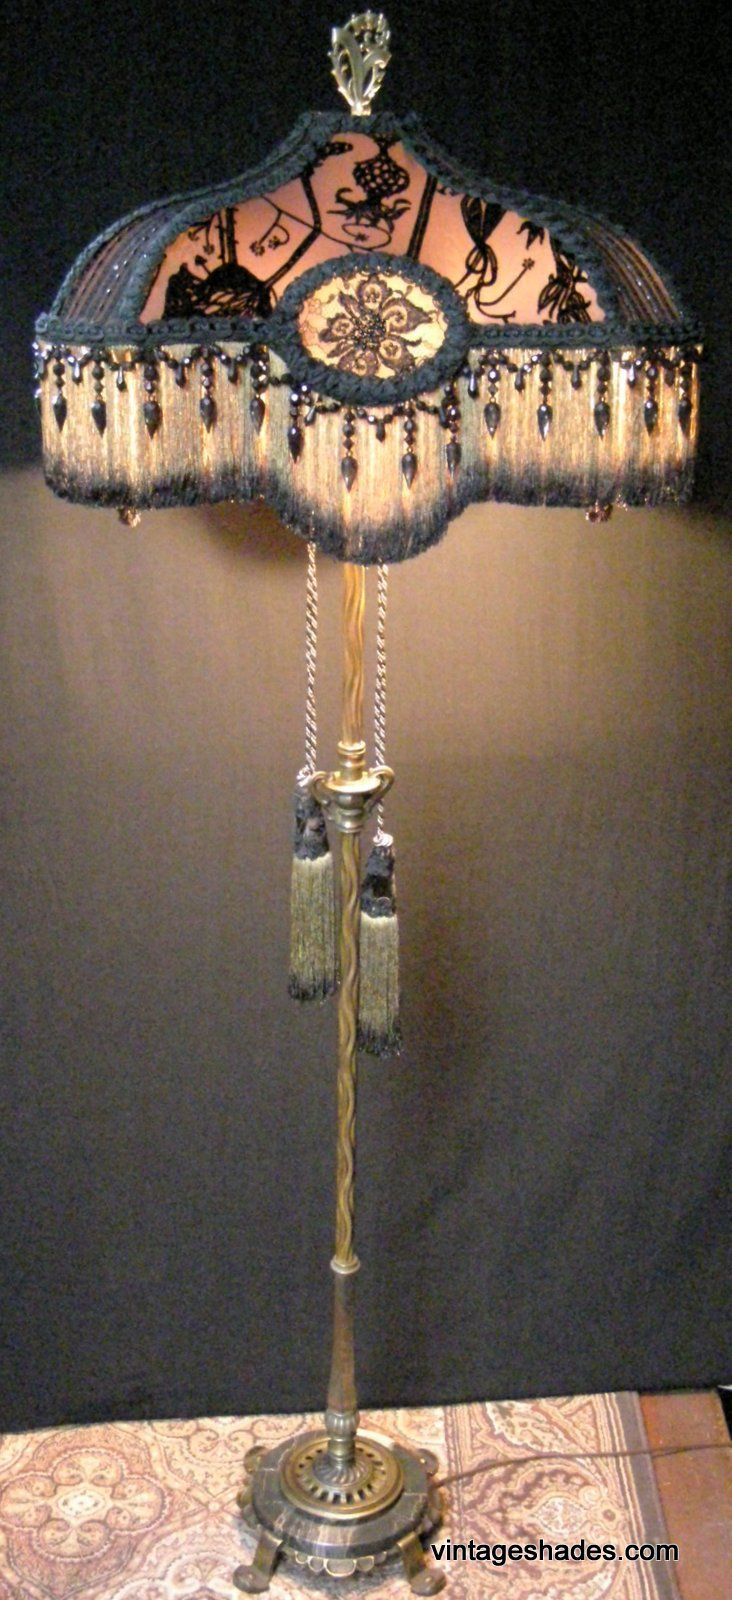 This Lamp Is An Amazing Antique Rembrandt Floor Lamp Made pertaining to sizing 732 X 1600